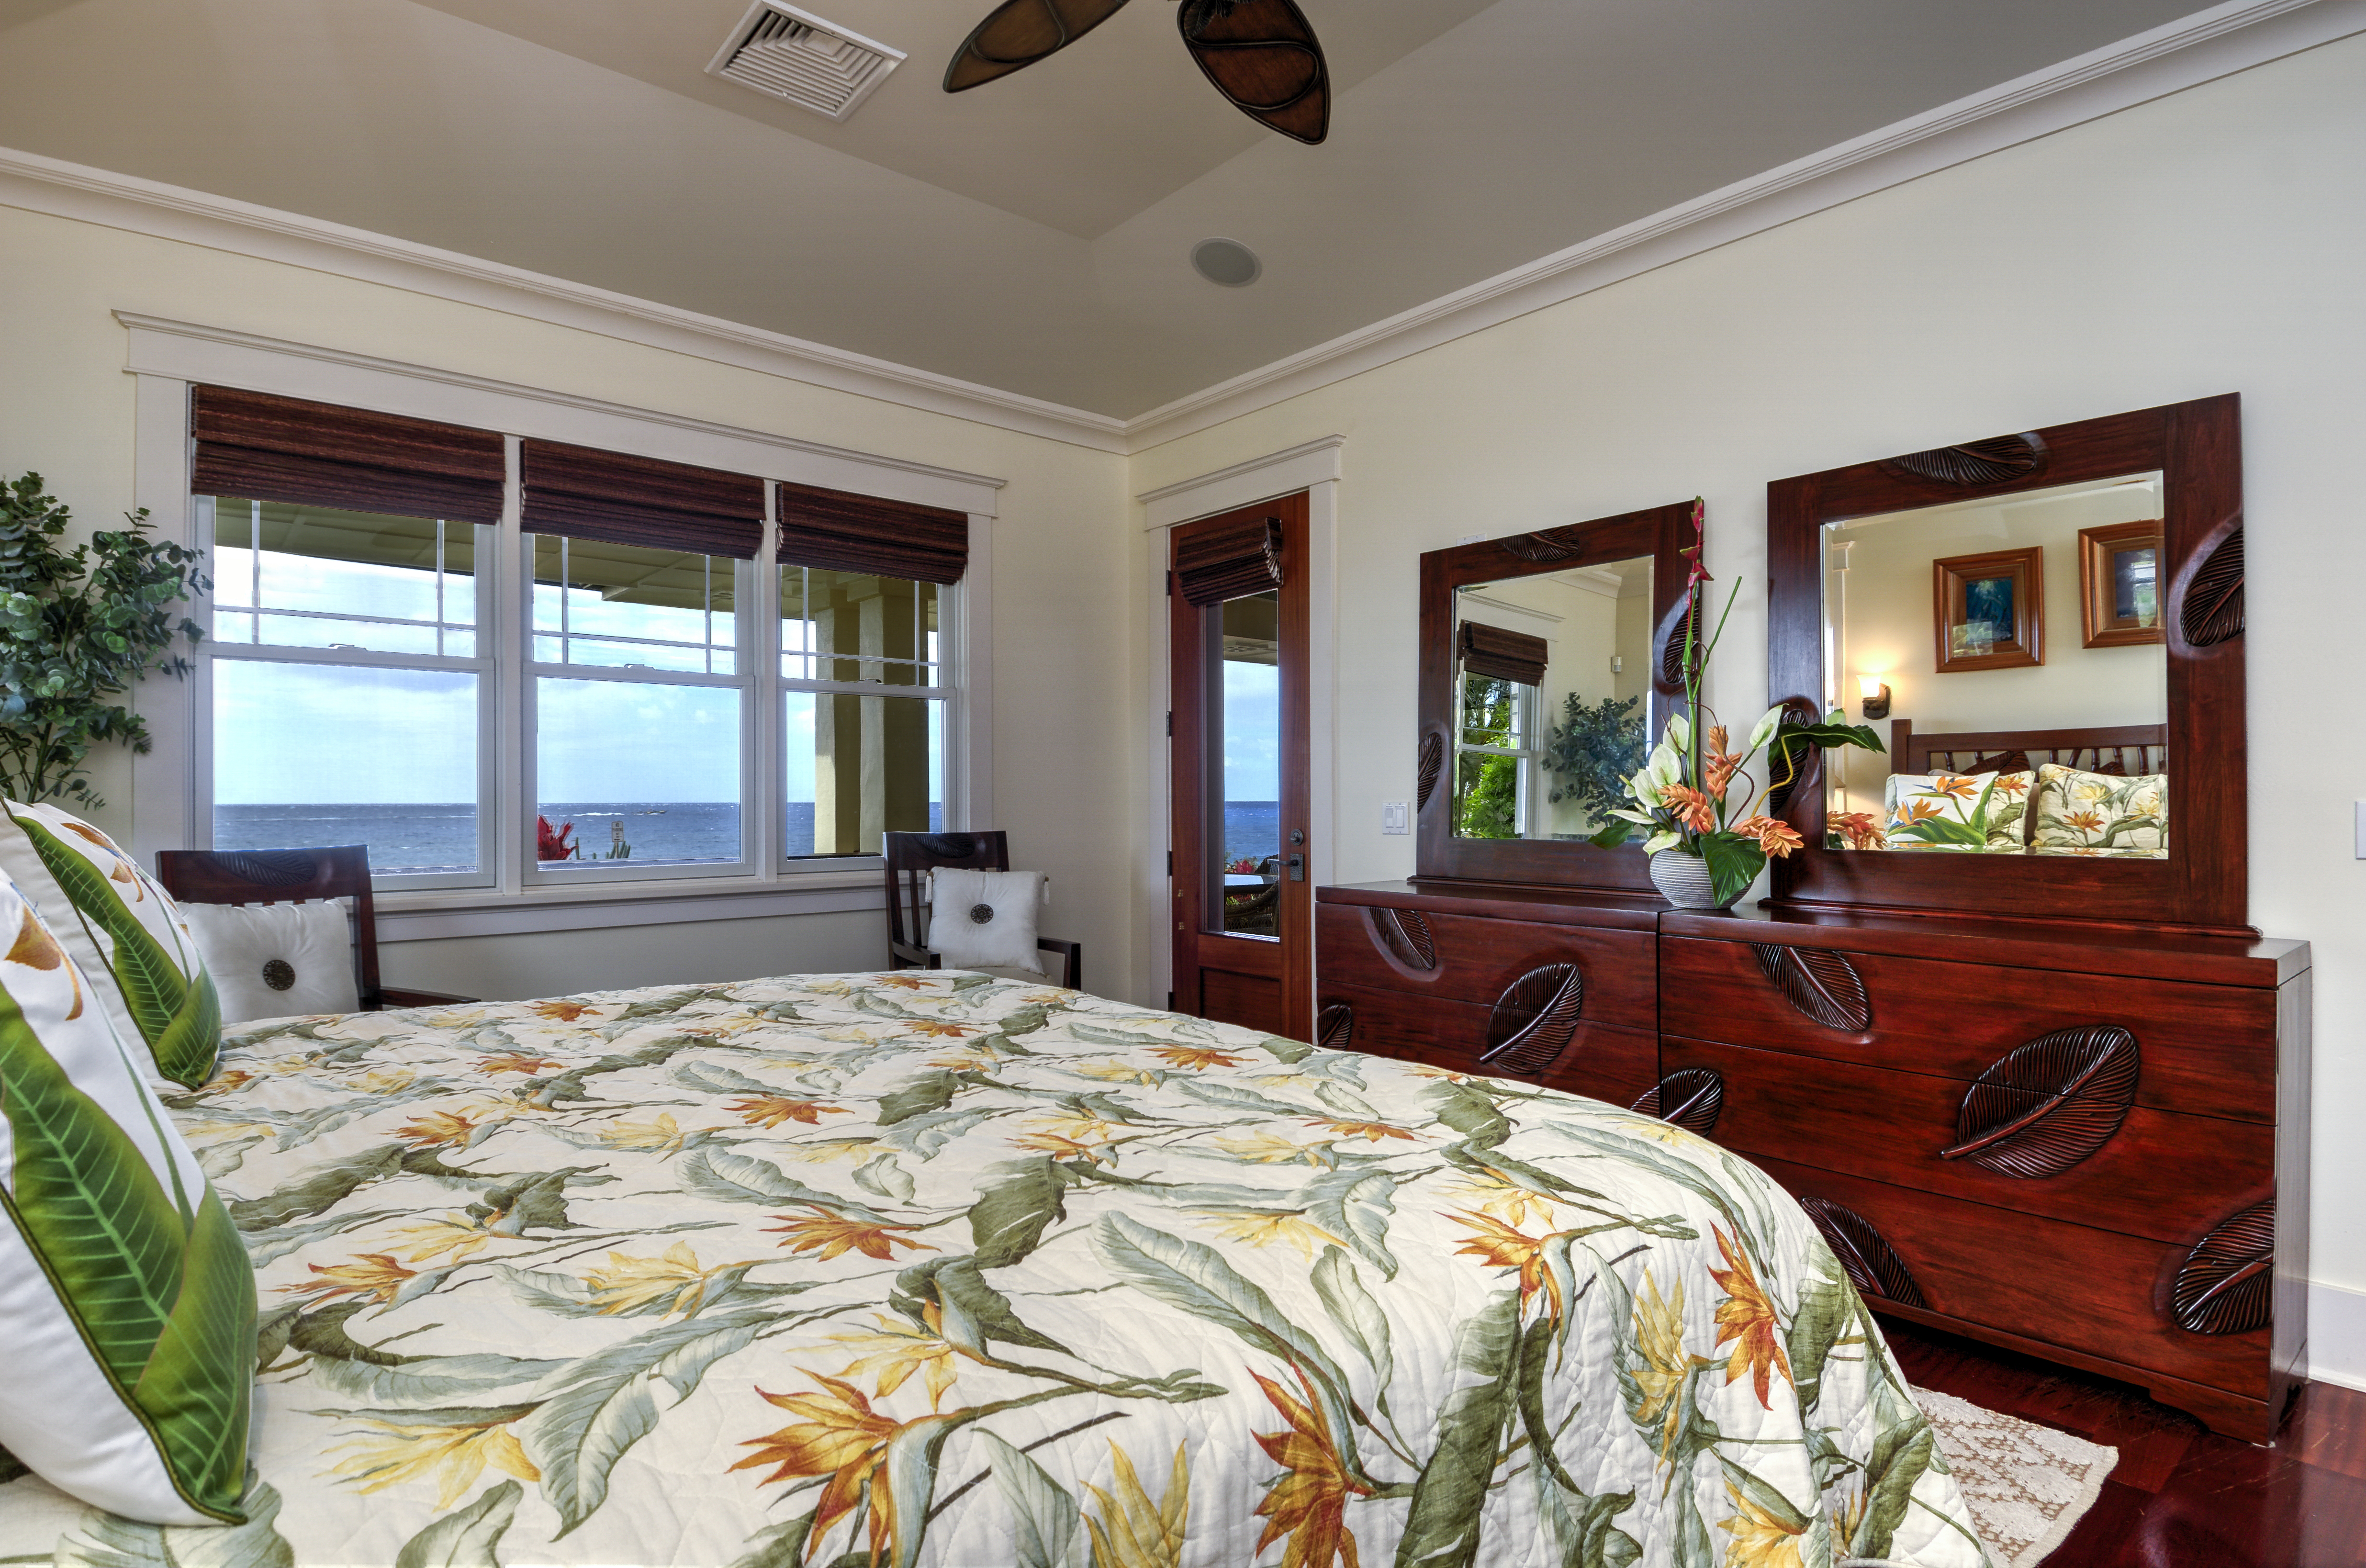 Honu La'e master bedroom is off the front of the house with ocean views, has an large ensuite bathroom, and opens to the living room.